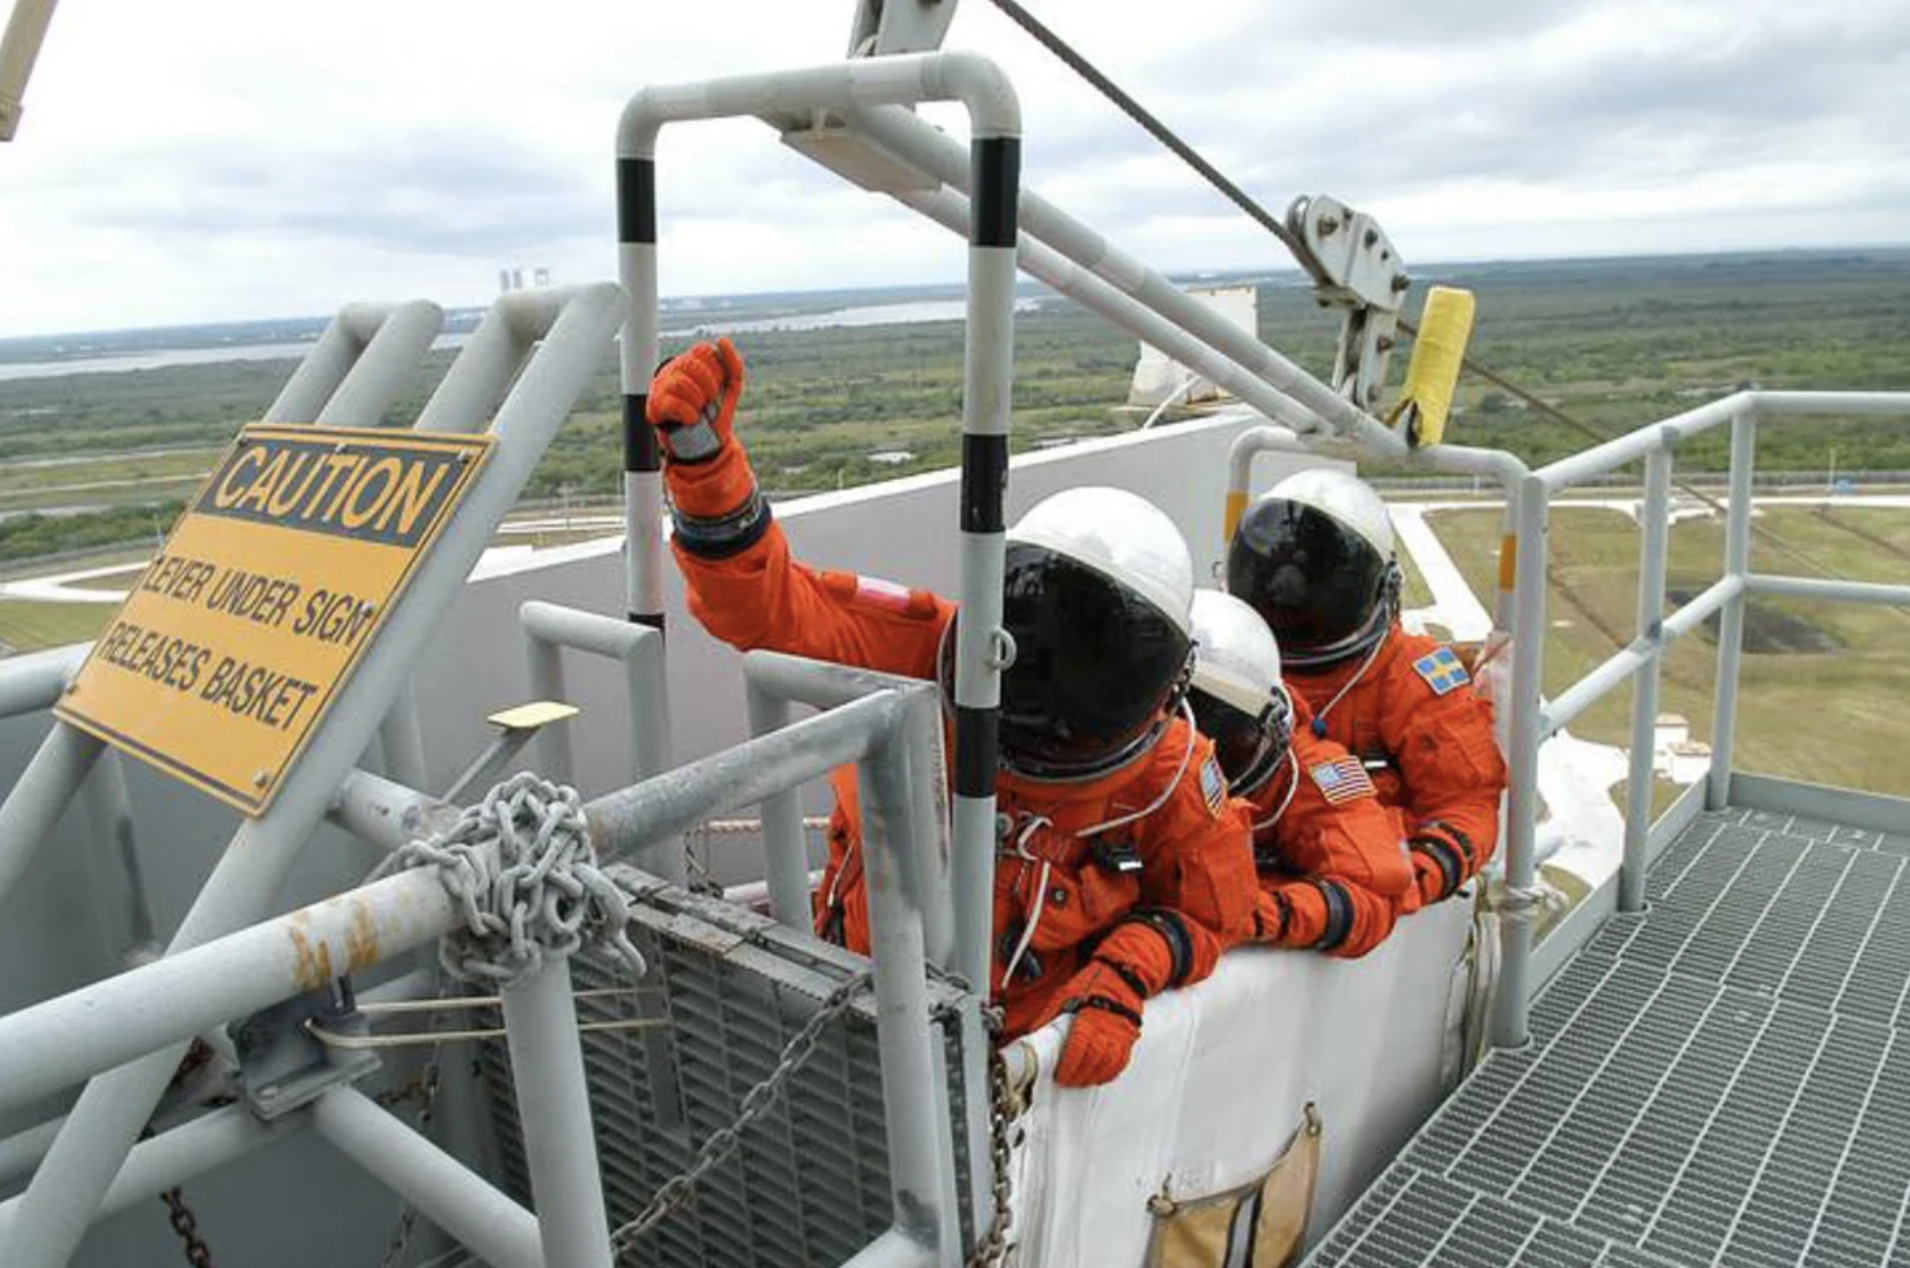 File photo from 2006 showing Space Shuttle astronauts practicing an emergency escape with the egress system on Launch Pad 39B.  (Photo: NASA/Kim Shiflett)